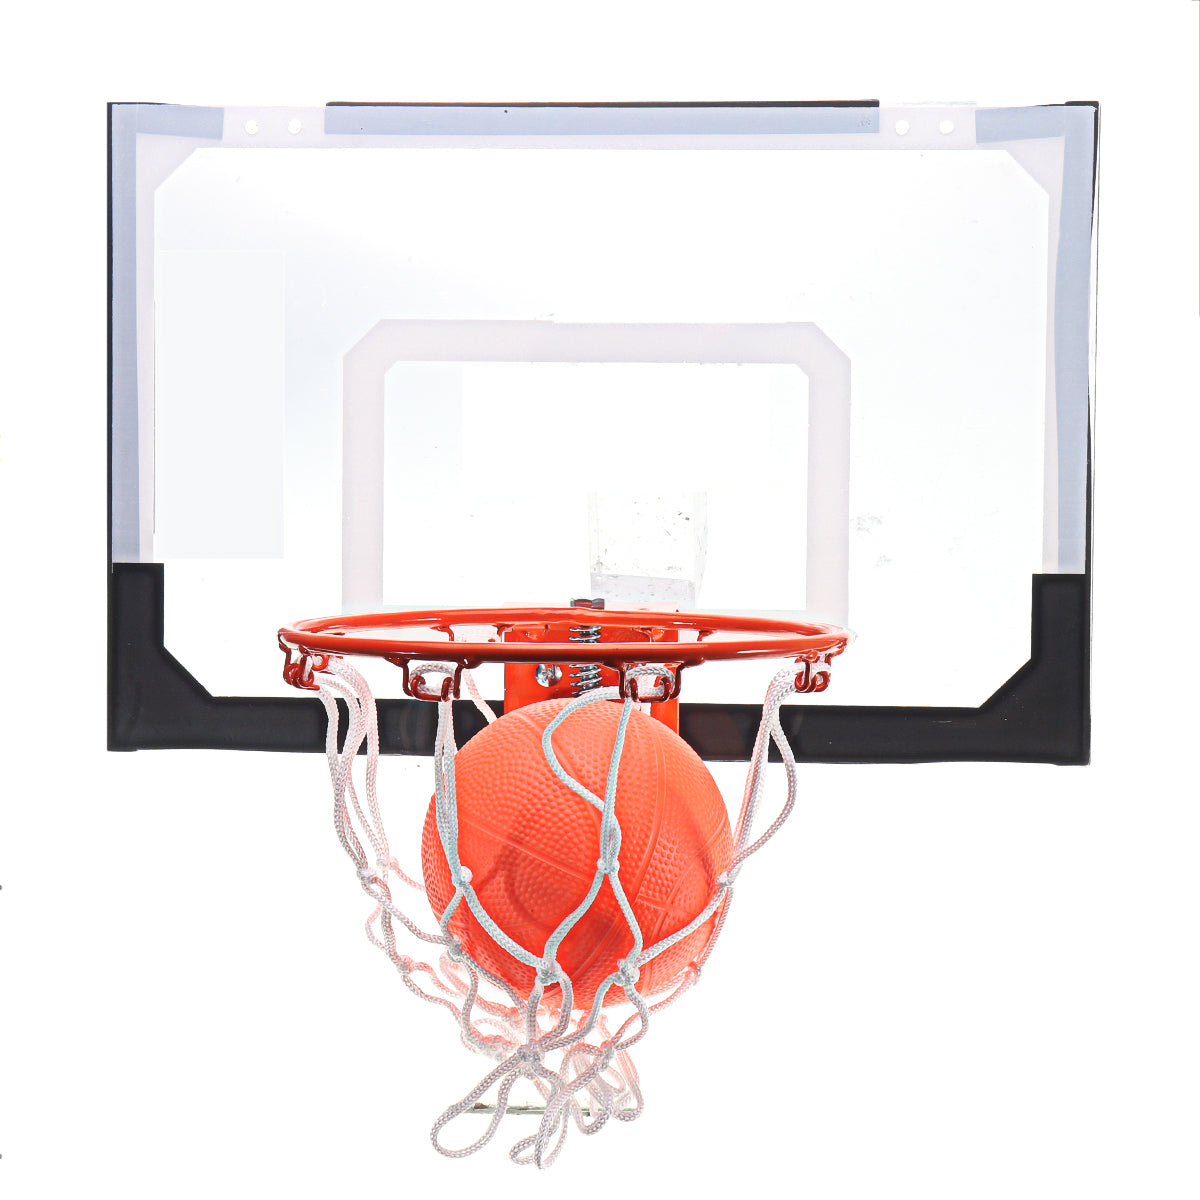 Compact Indoor Basketball Hoop Set for Adults - Easy Door Mounting, Includes Ball and Pump, Home, Office, or Exercise Room"